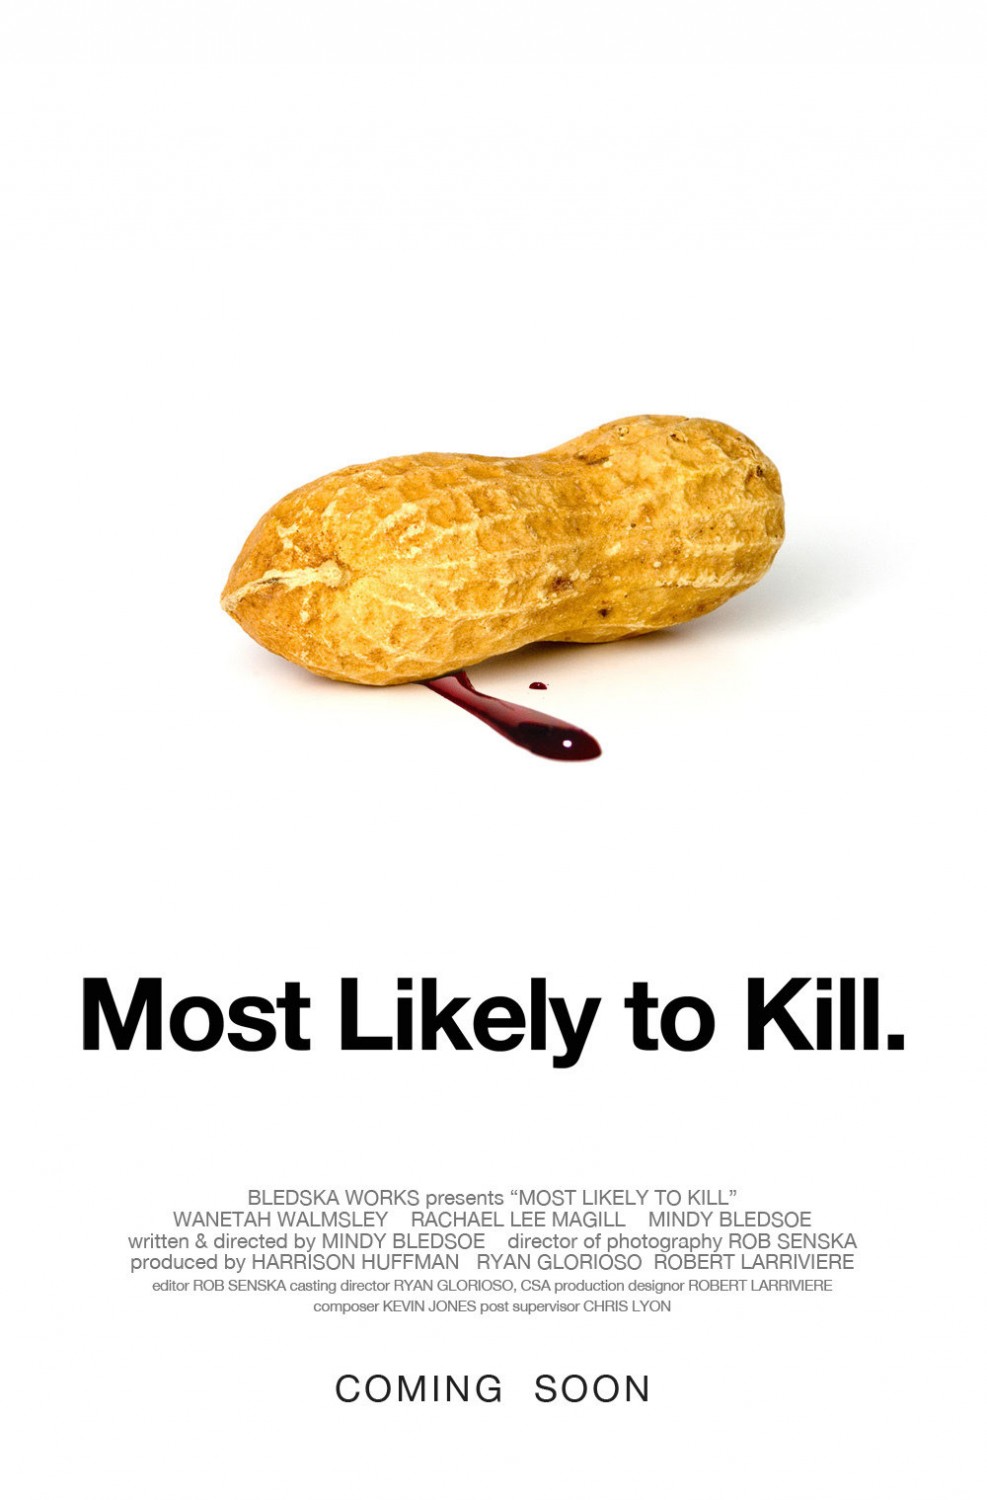 Extra Large Movie Poster Image for Most Likely to Kill